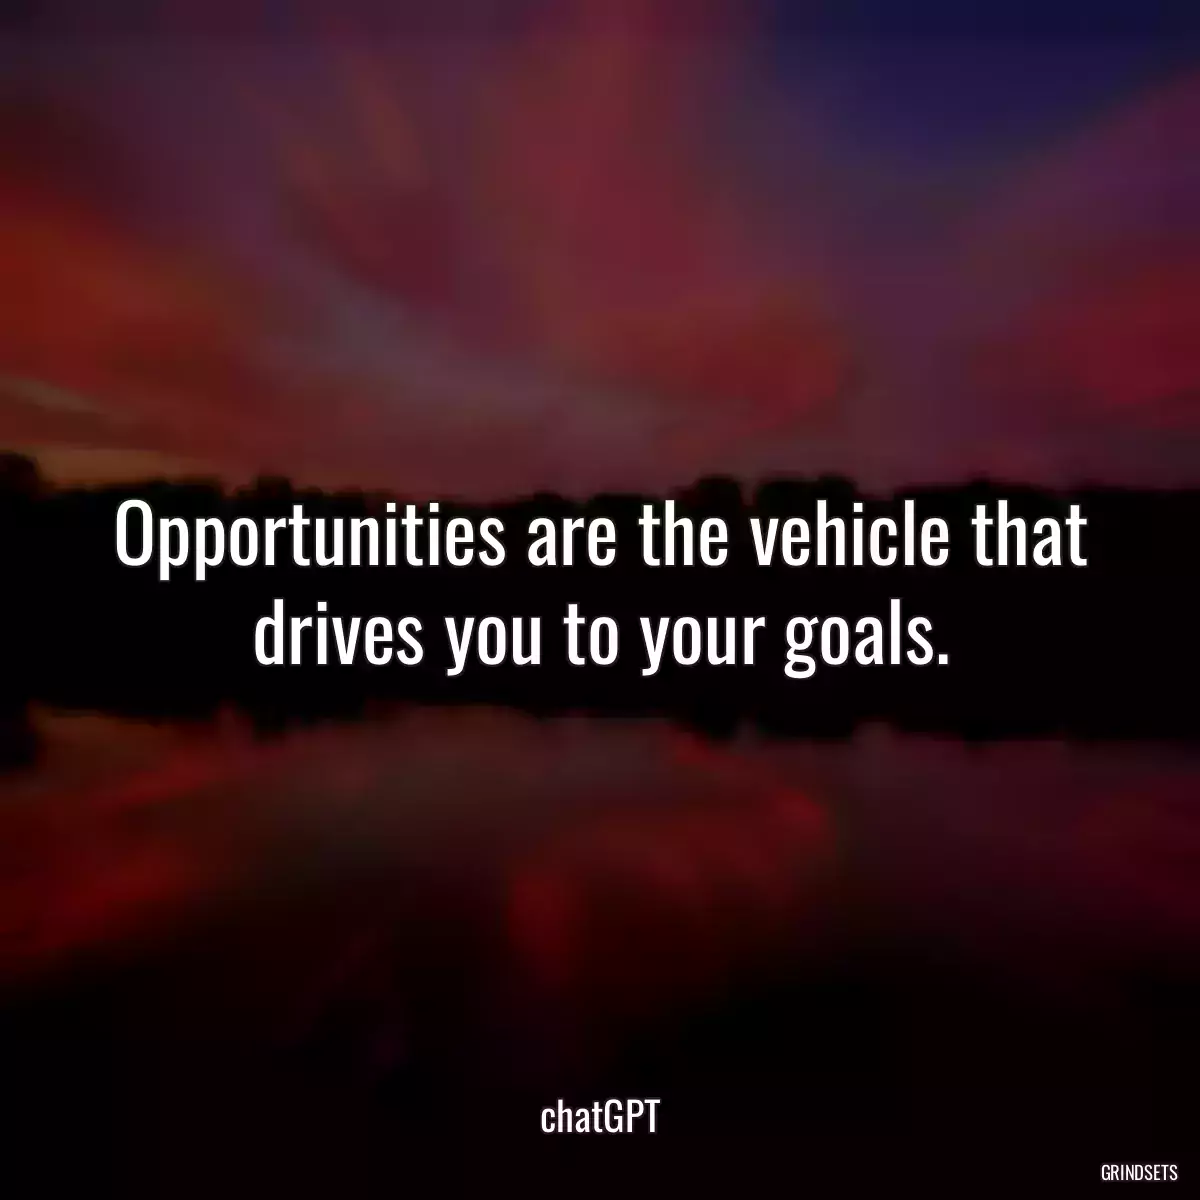 Opportunities are the vehicle that drives you to your goals.